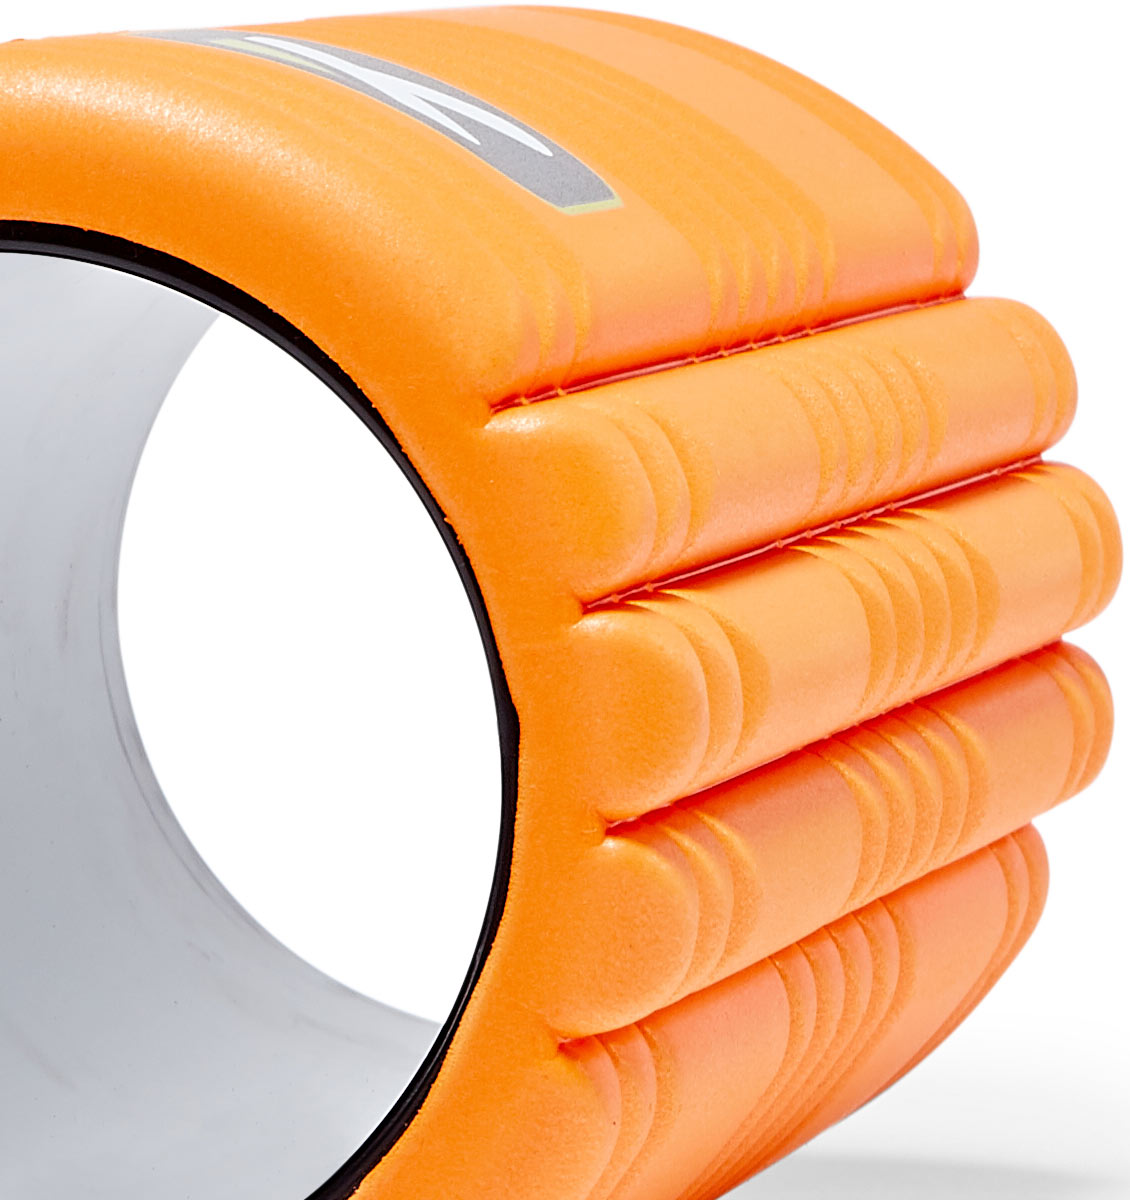 TPT3GRDOWS00000 TriggerPoint The Grid 1.0 Foam Roller Orange - 60 Degree Angle - Close Up